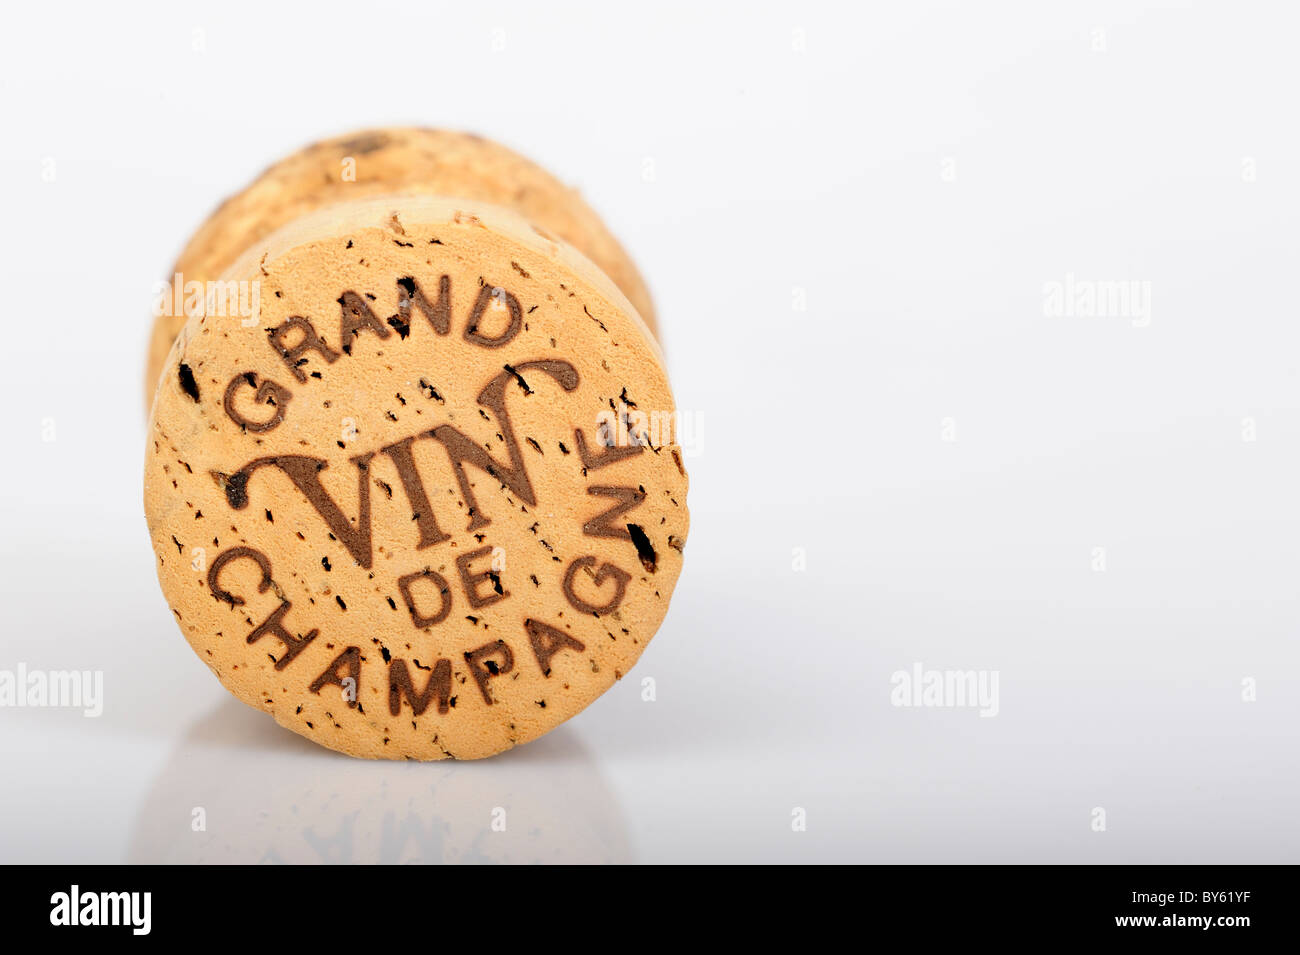 Stock photo of a champagne cork shot against a white background. Stock Photo